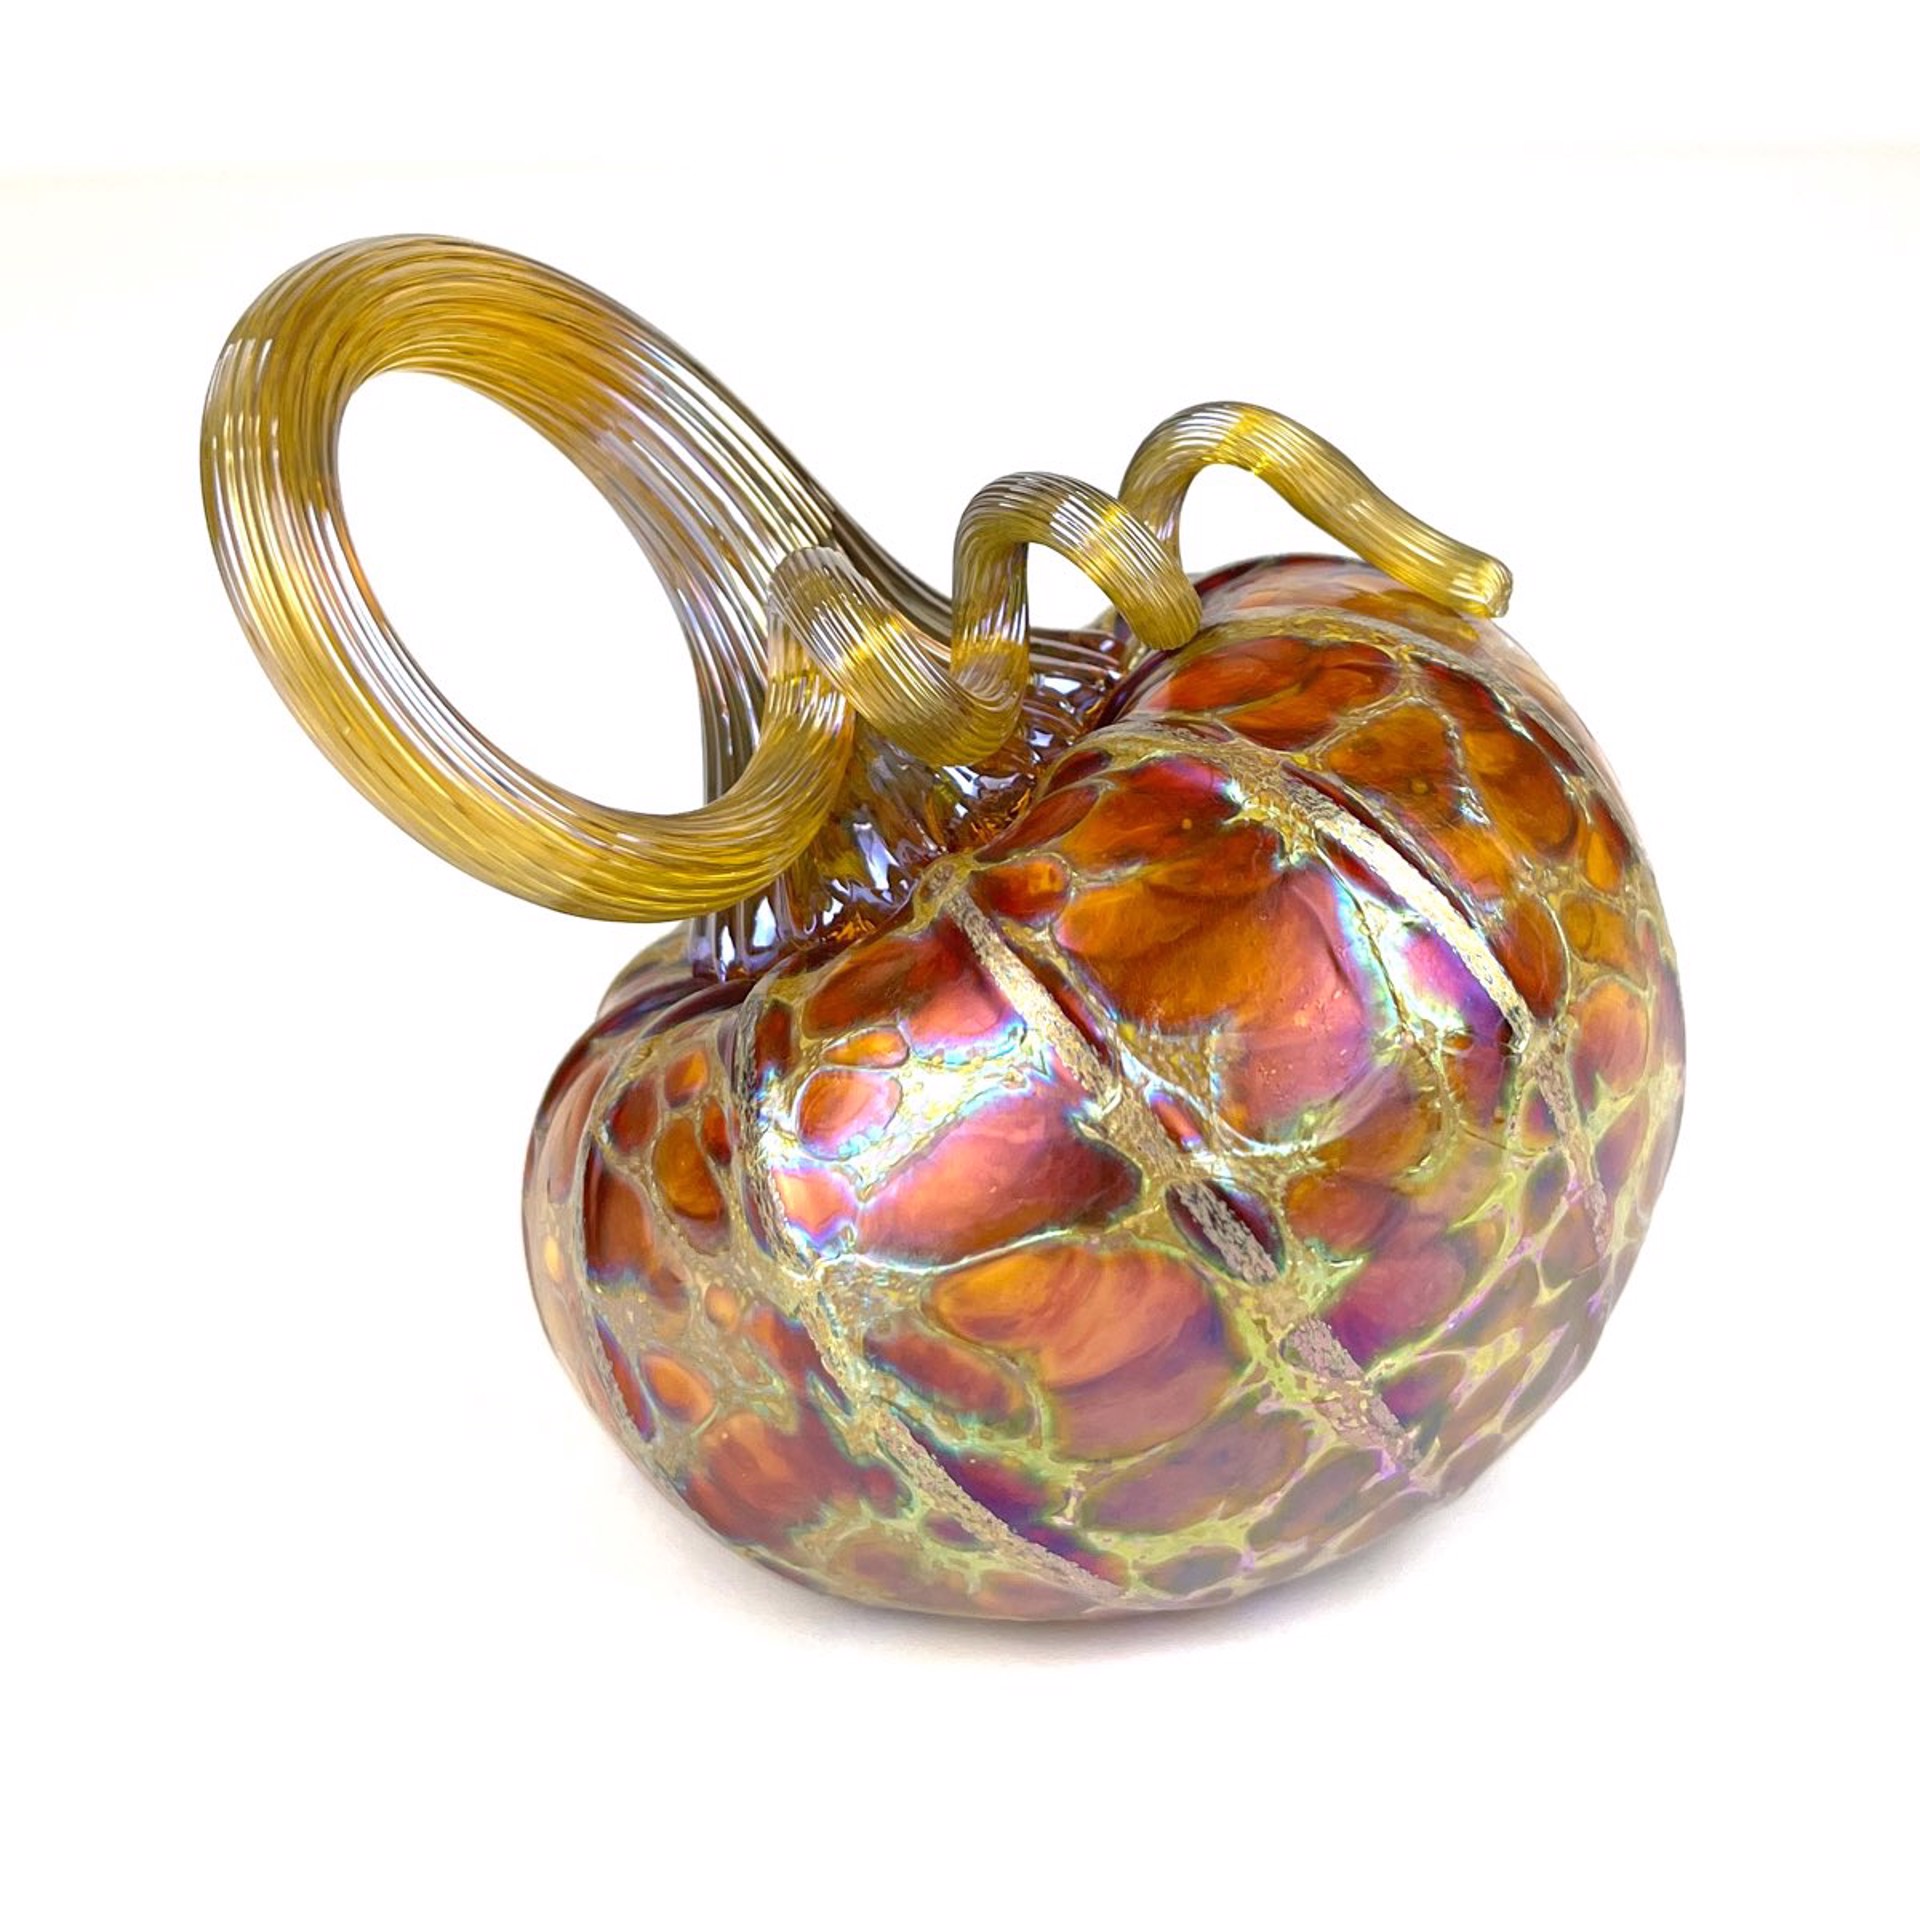 Small Tilted Harvest Pumpkin by Furnace Glass